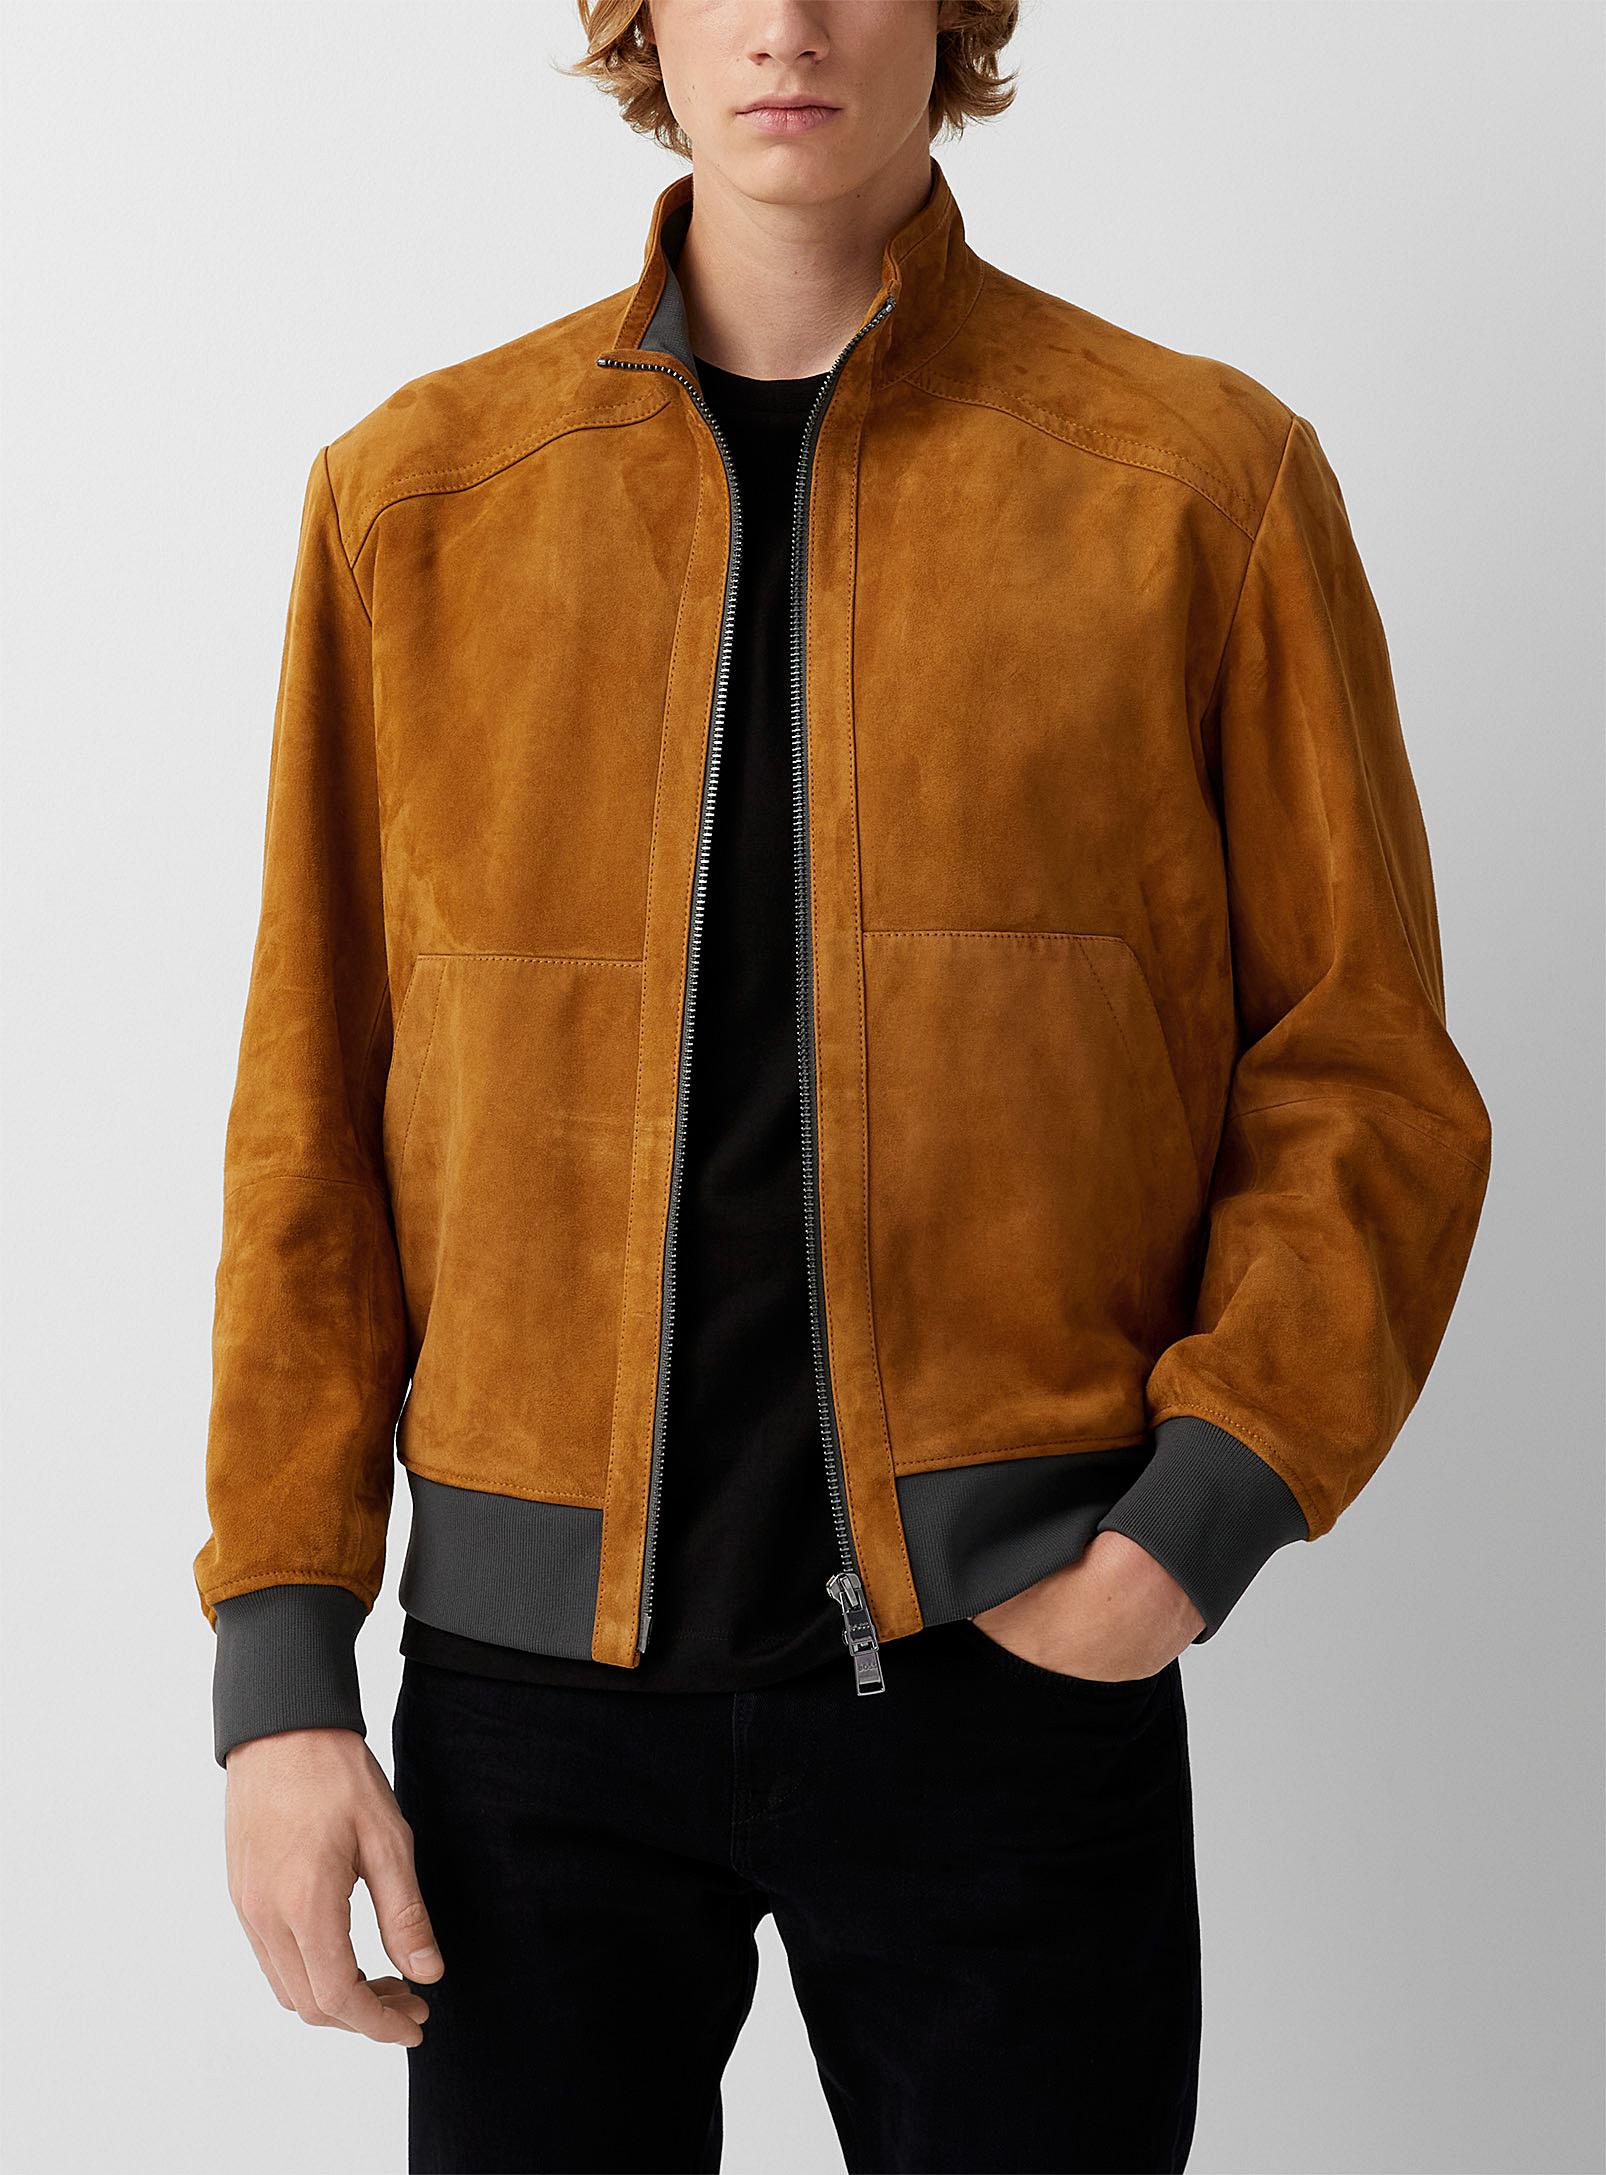 BOSS by HUGO BOSS Accent Edging Suede Jacket in Brown for Men | Lyst